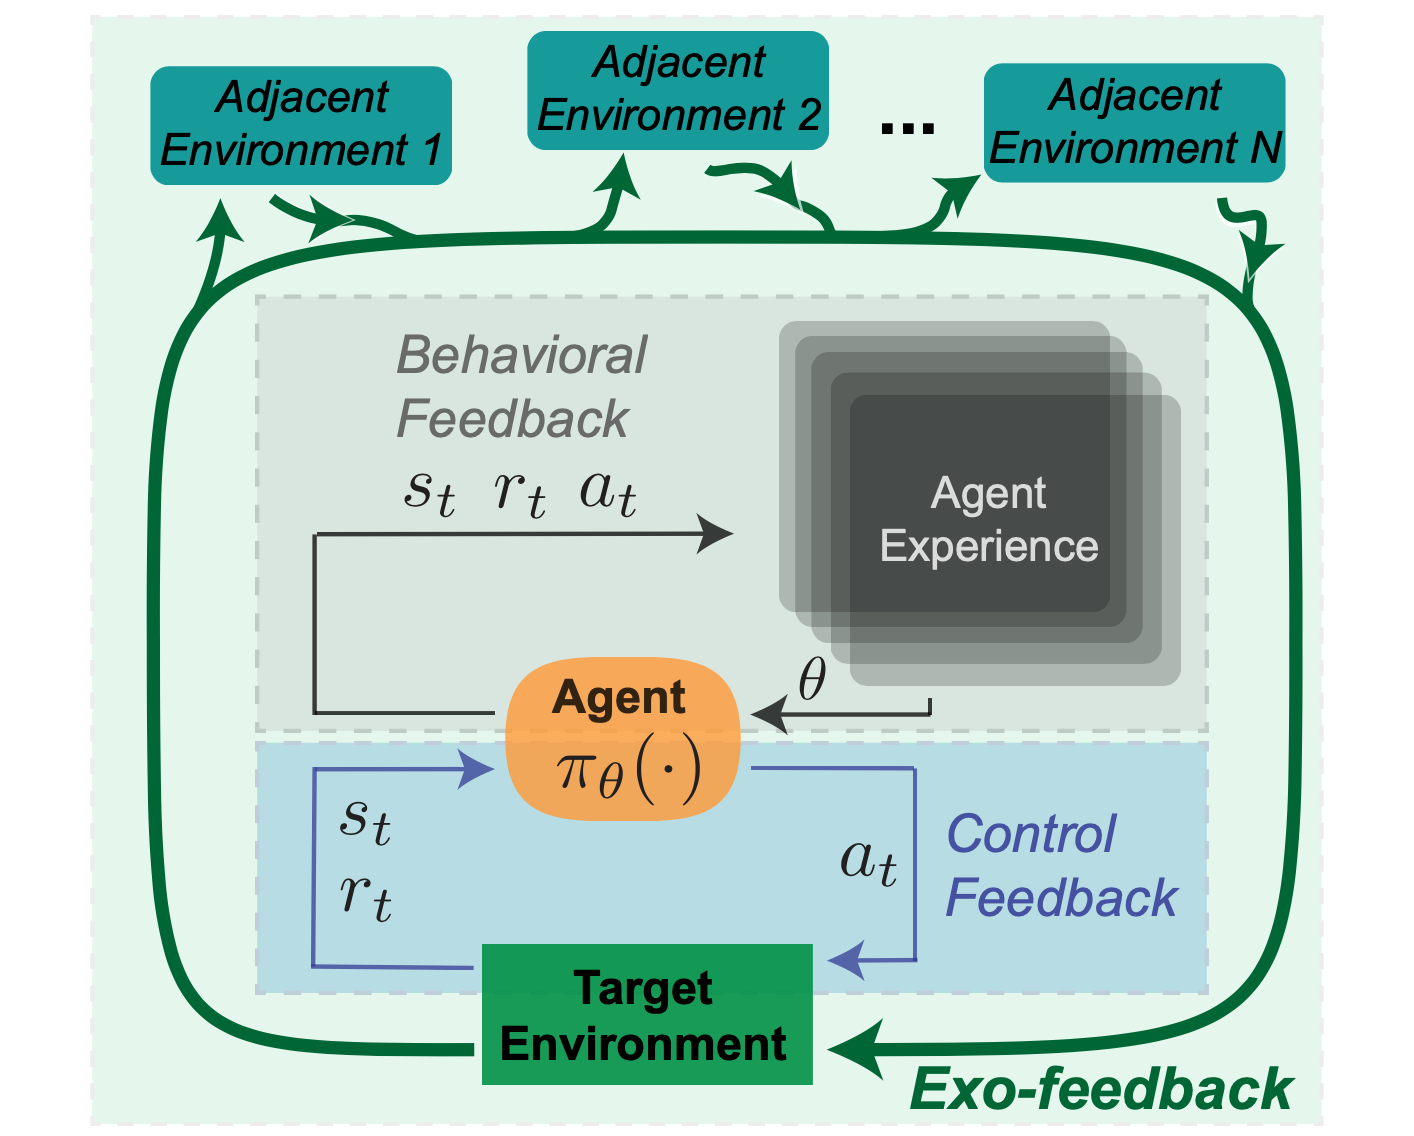 Designing Societally Beneficial Reinforcement Learning Systems